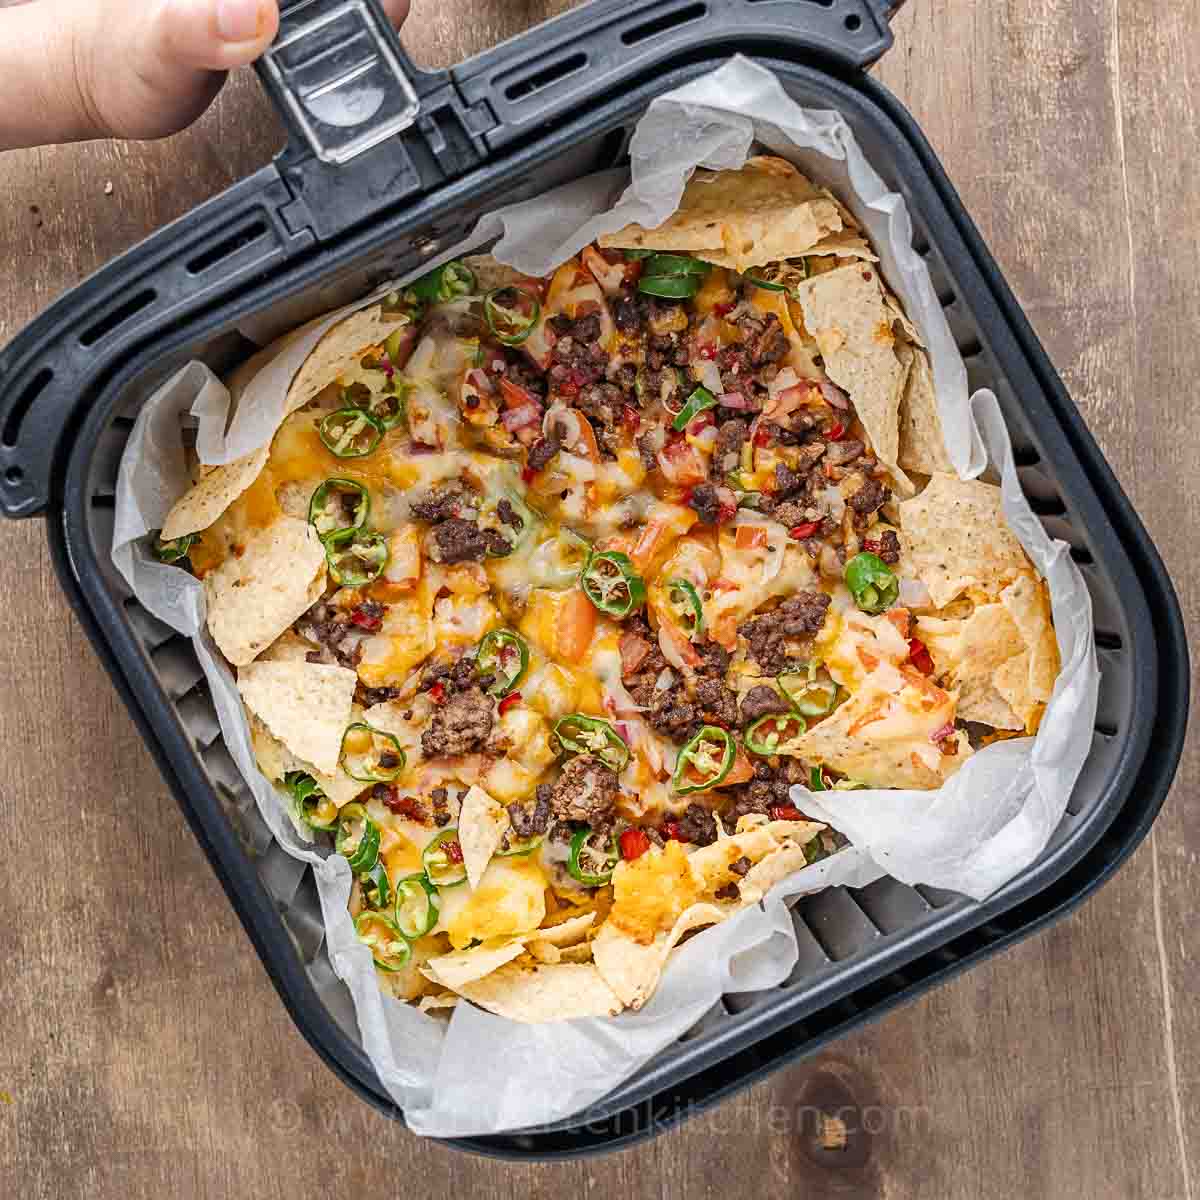 beef nachos with cheese, salsa and jalapenos cooked in an air fryer.